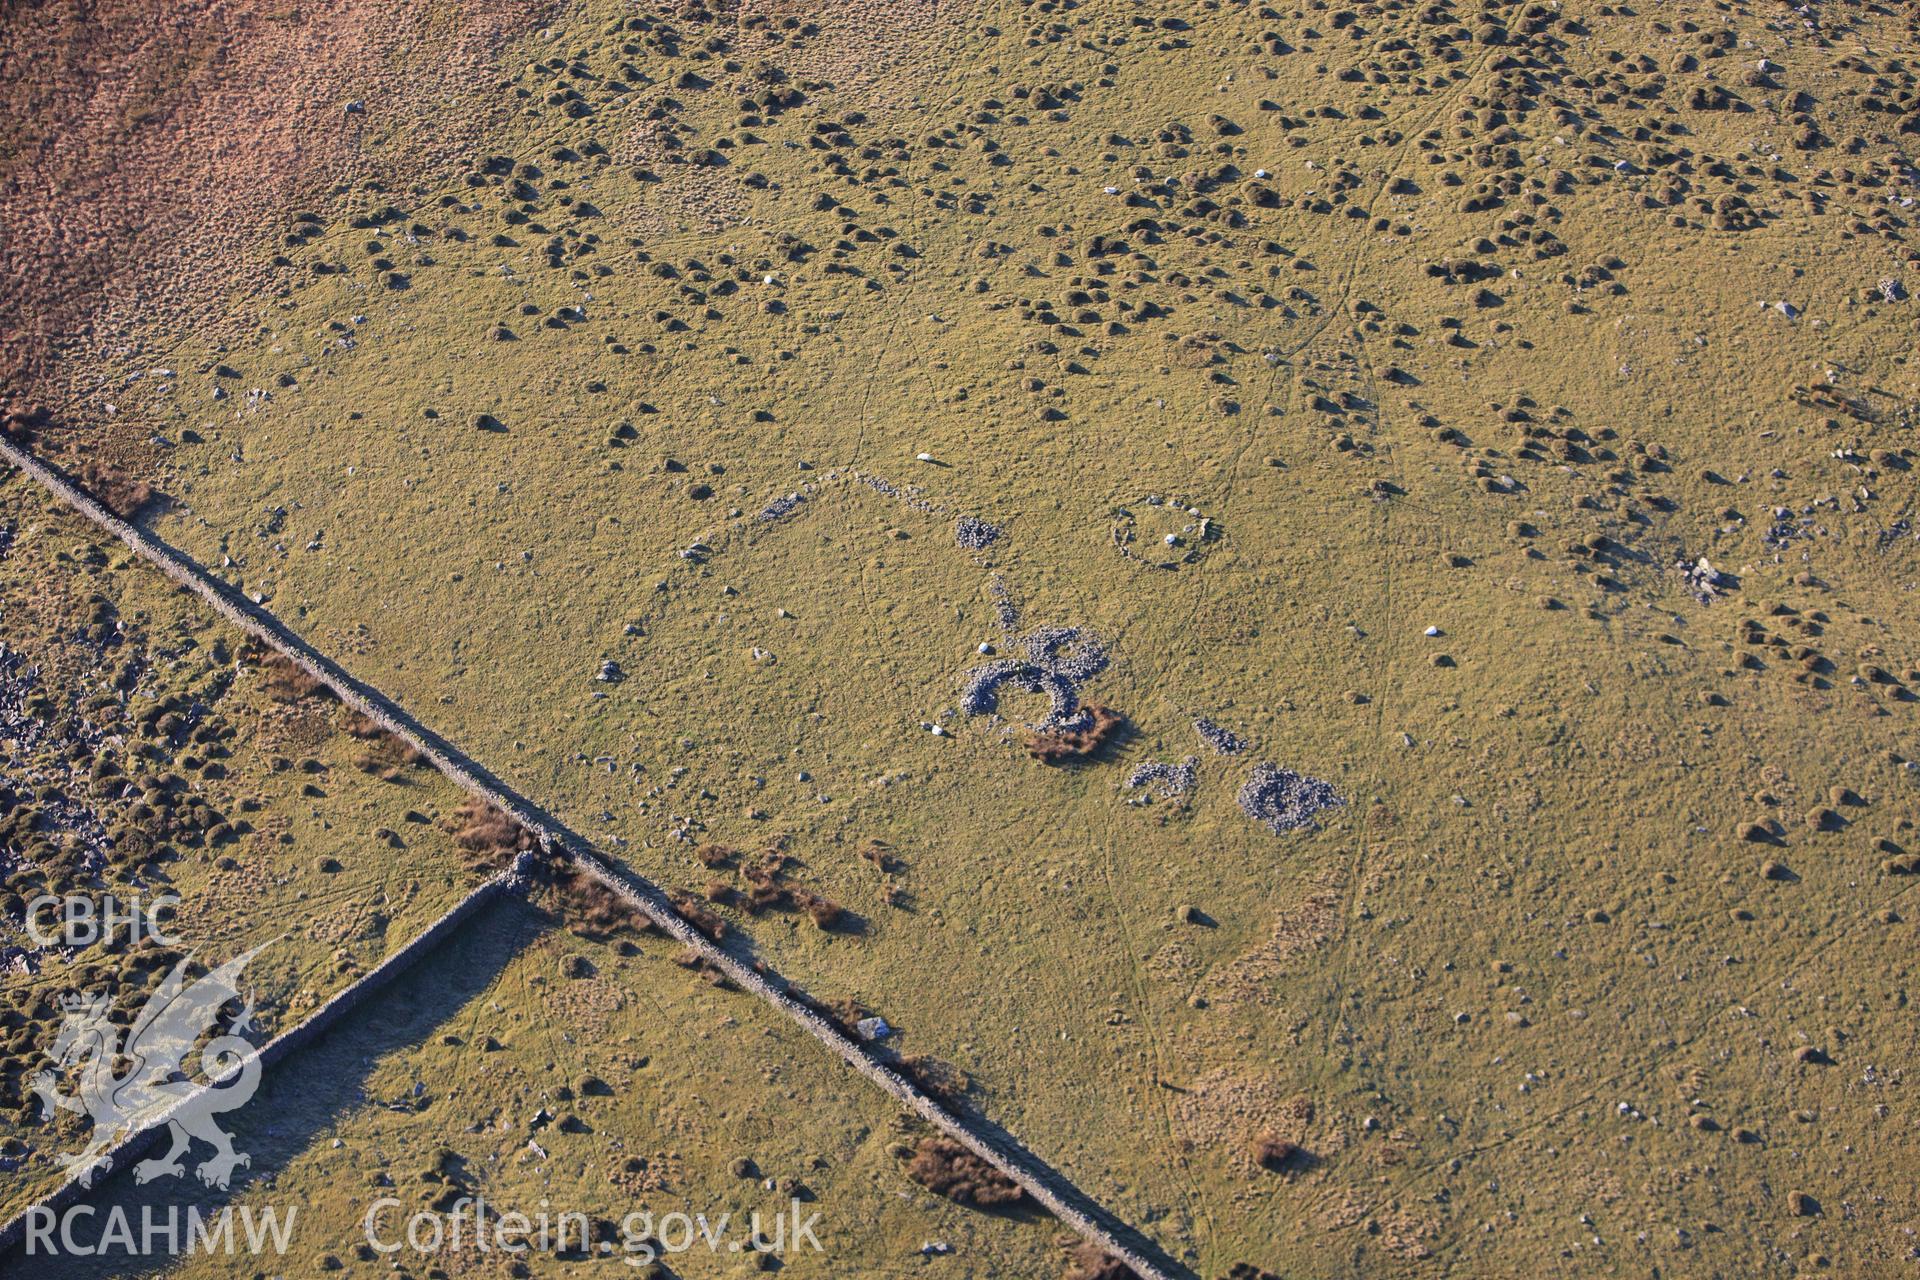 RCAHMW colour oblique photograph of Mynydd Egryn, hut circle settlement. Taken by Toby Driver on 10/12/2012.